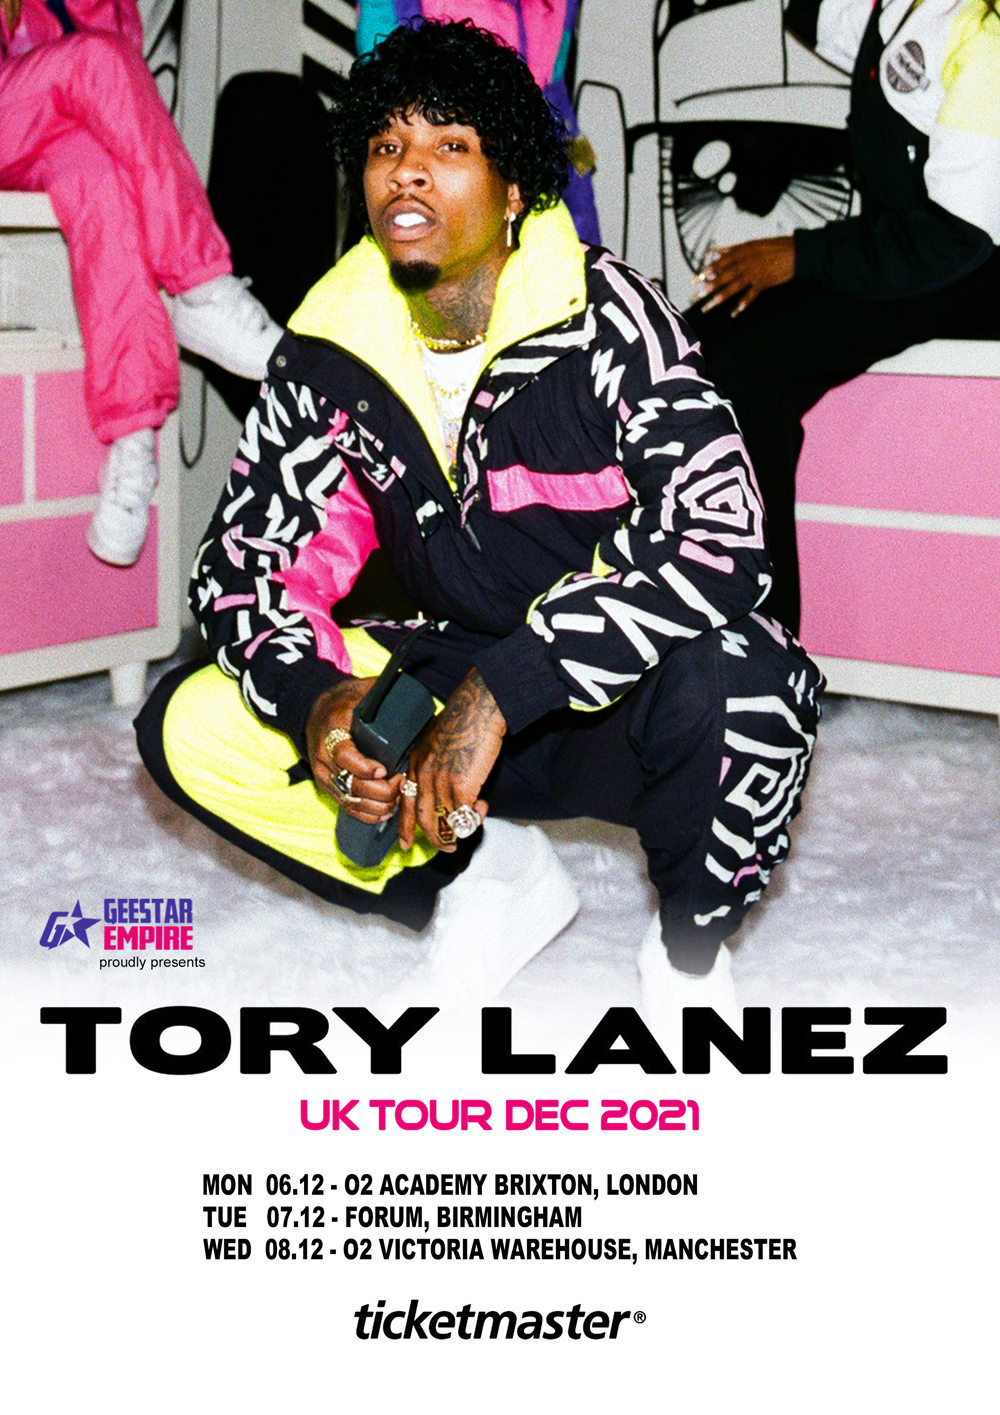 Canadian rap star and Grammy nominee Tory Lanez is heading to London as